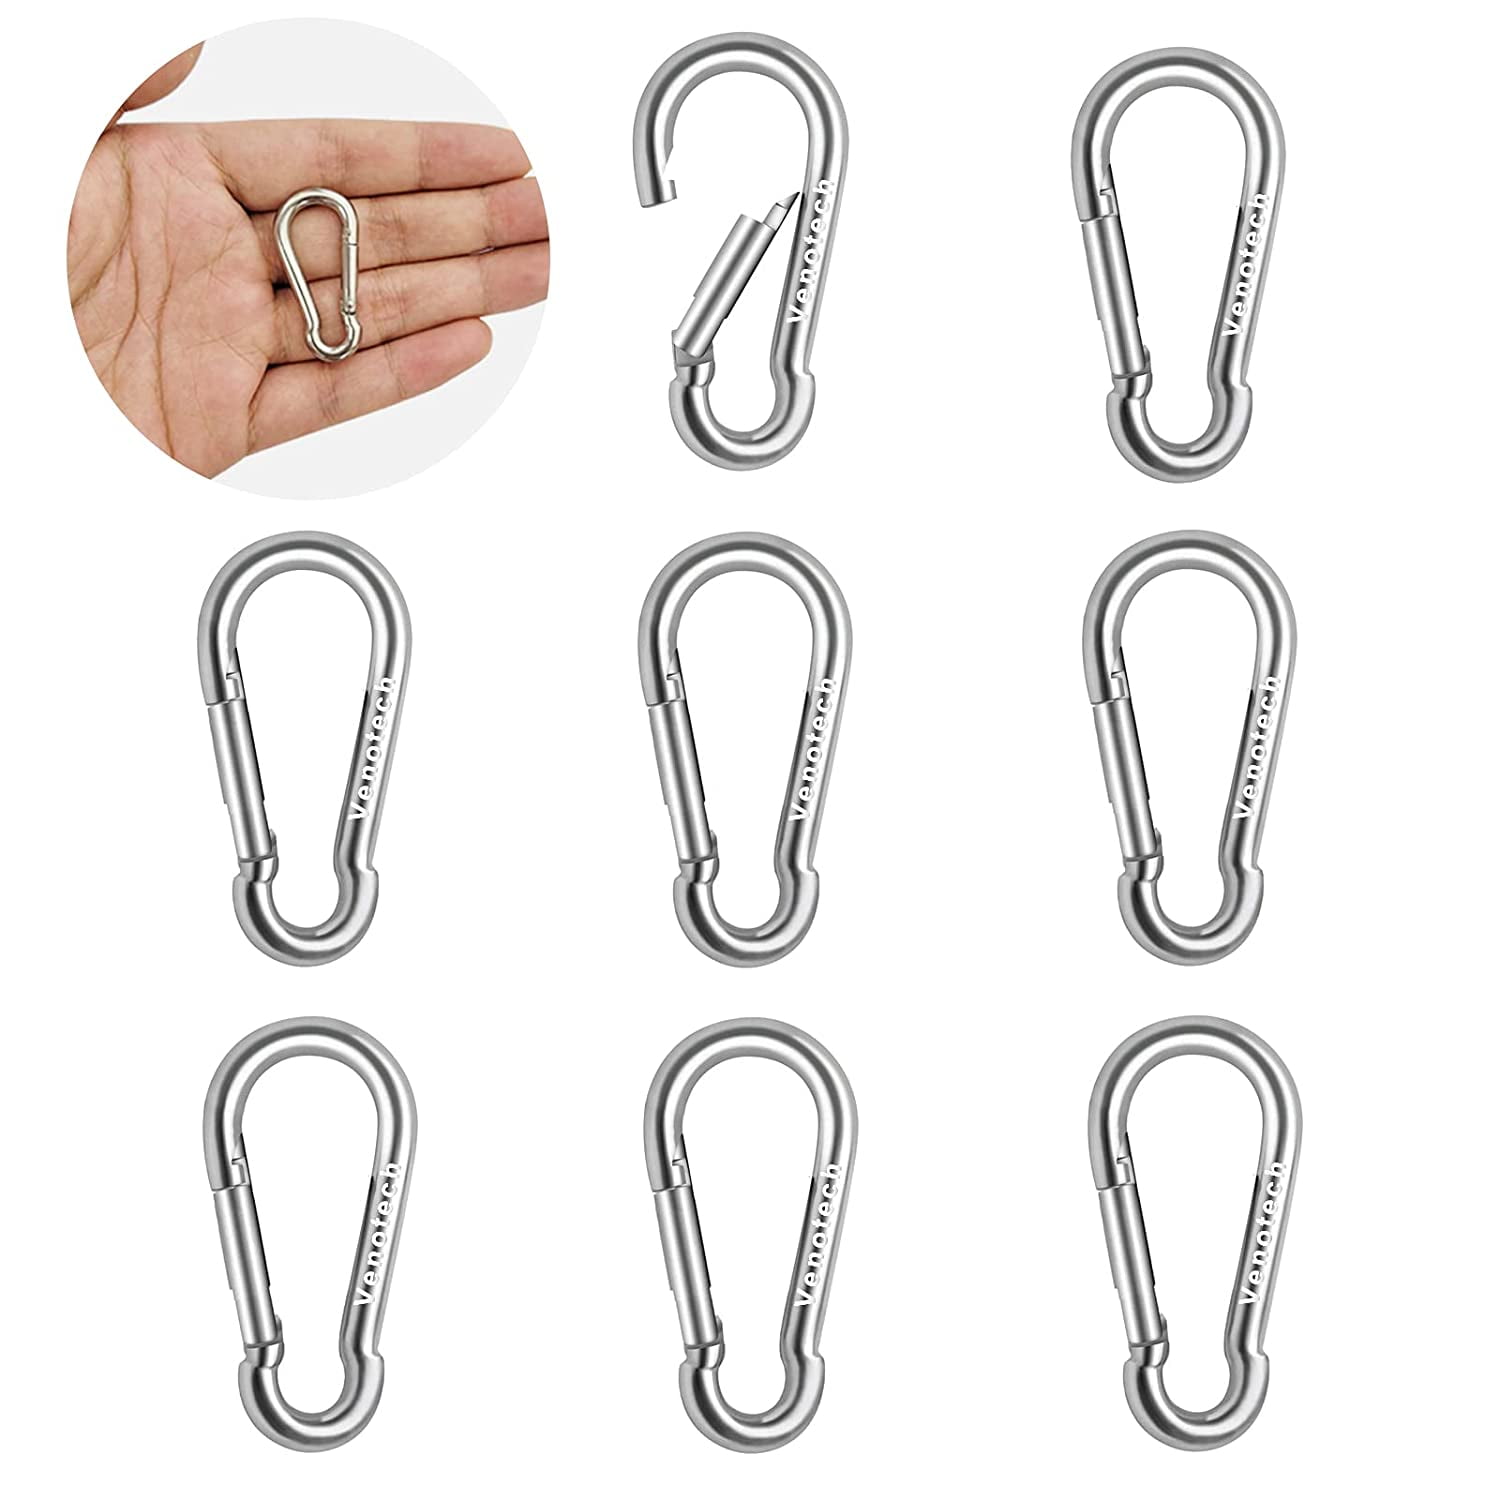 8 Pcs Small Carabiner Clip Stainless Steel Spring Clips Snap Hooks